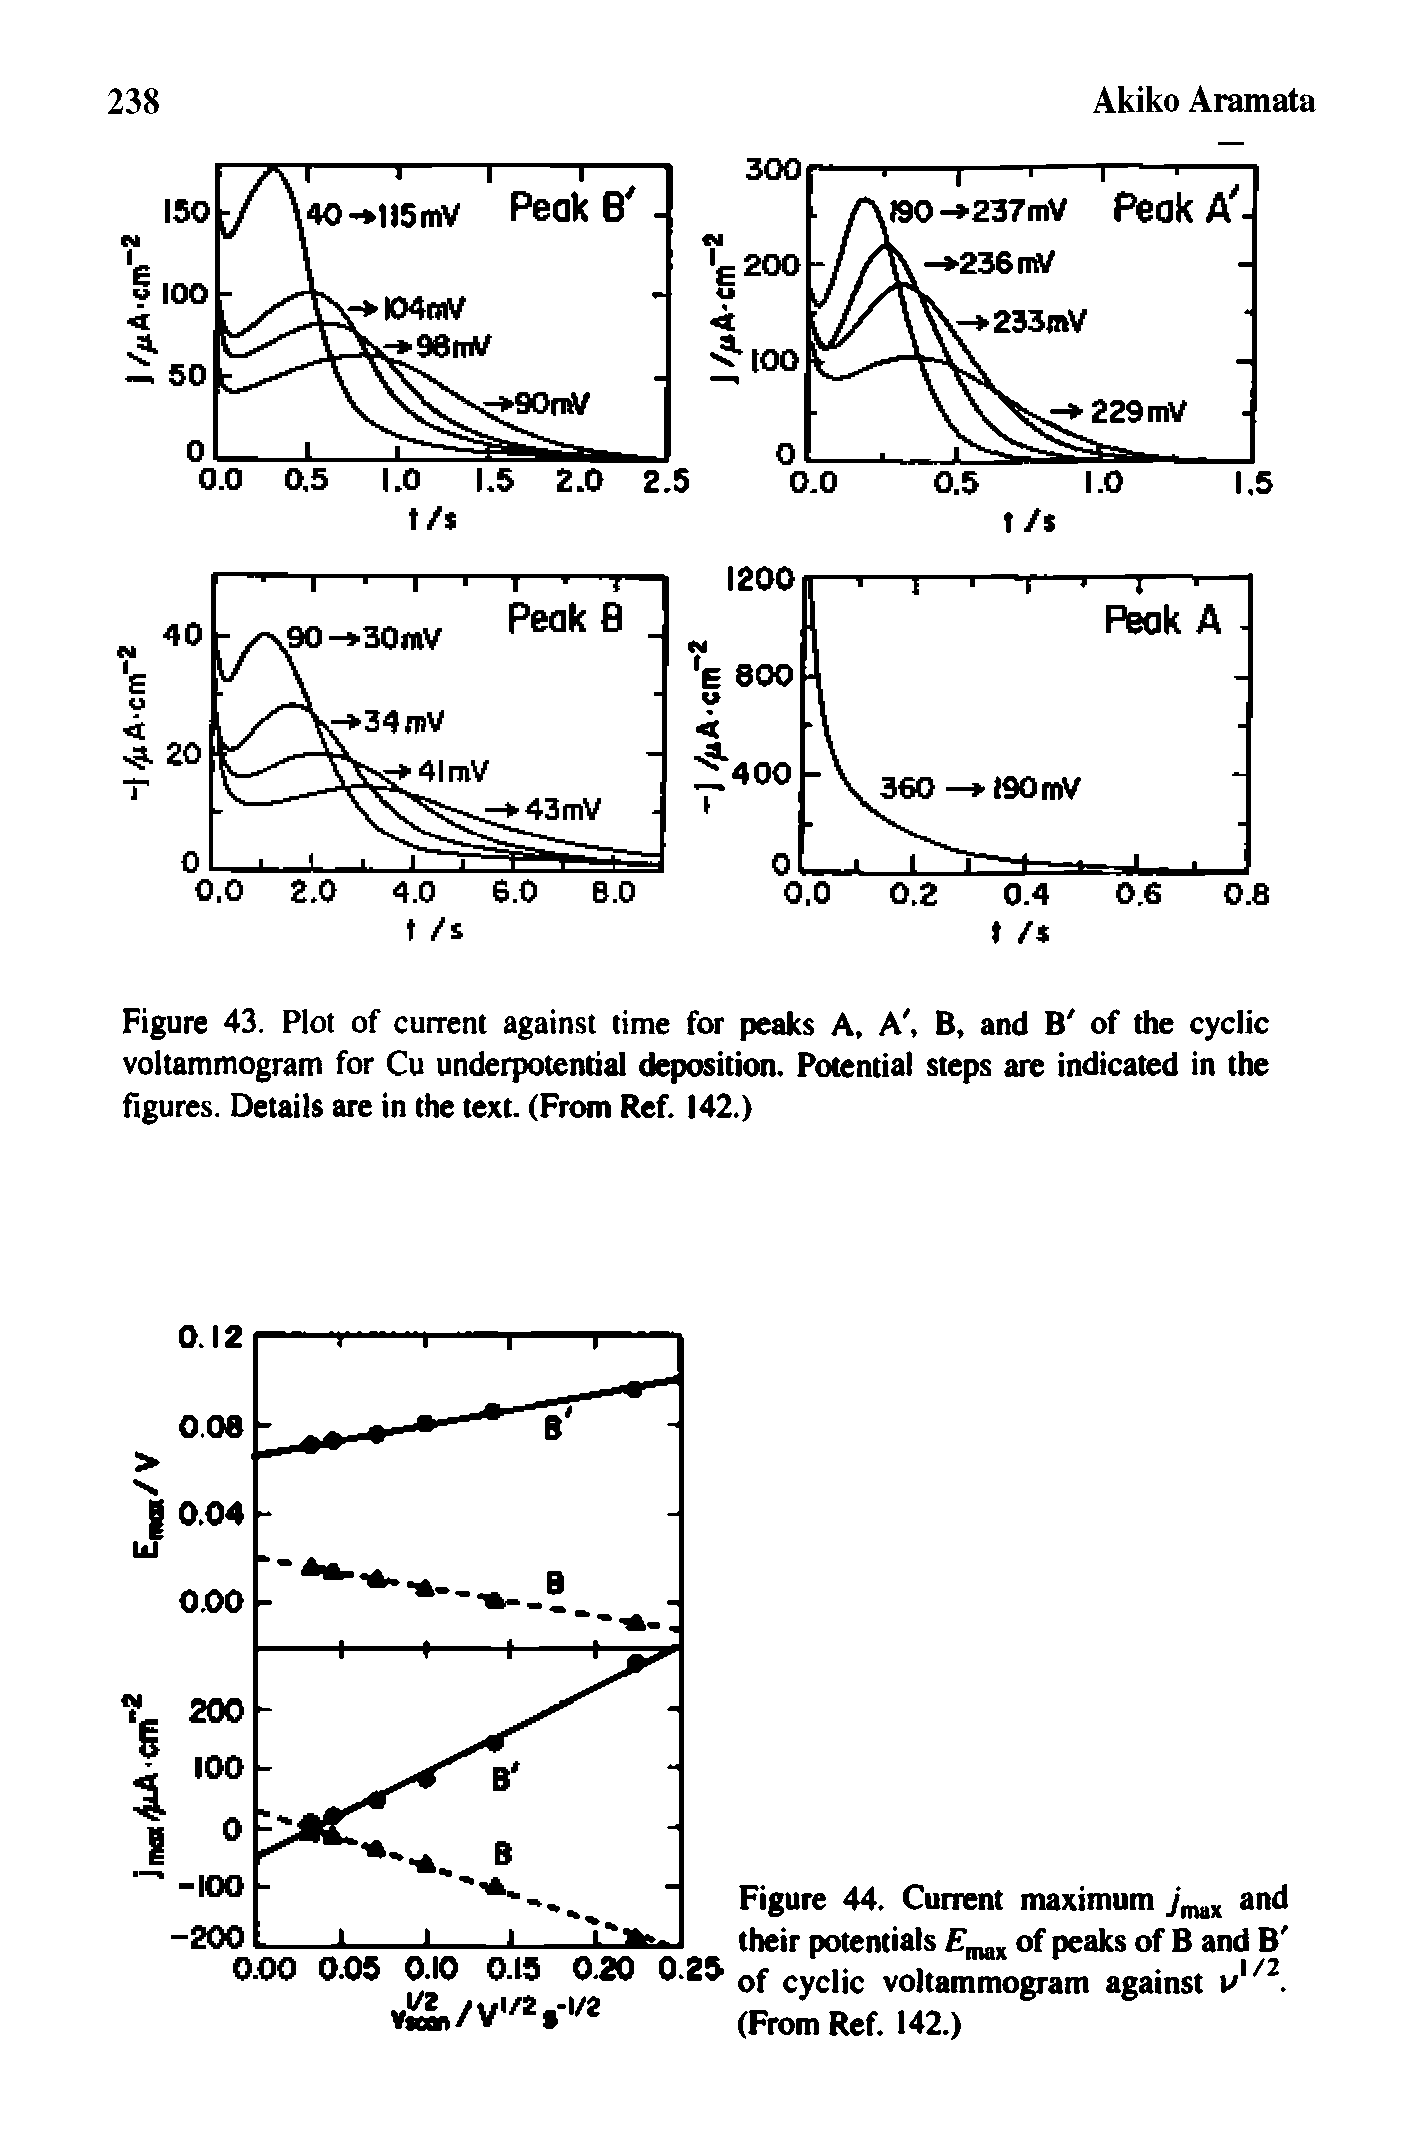 Figure 43. Plot of current against time for peaks A, A, B, and B of the cyclic voltammogram for Cu underpotential deposition. Potential steps are indicated in the figures. Details are in the text. (From Ref. 142.)...